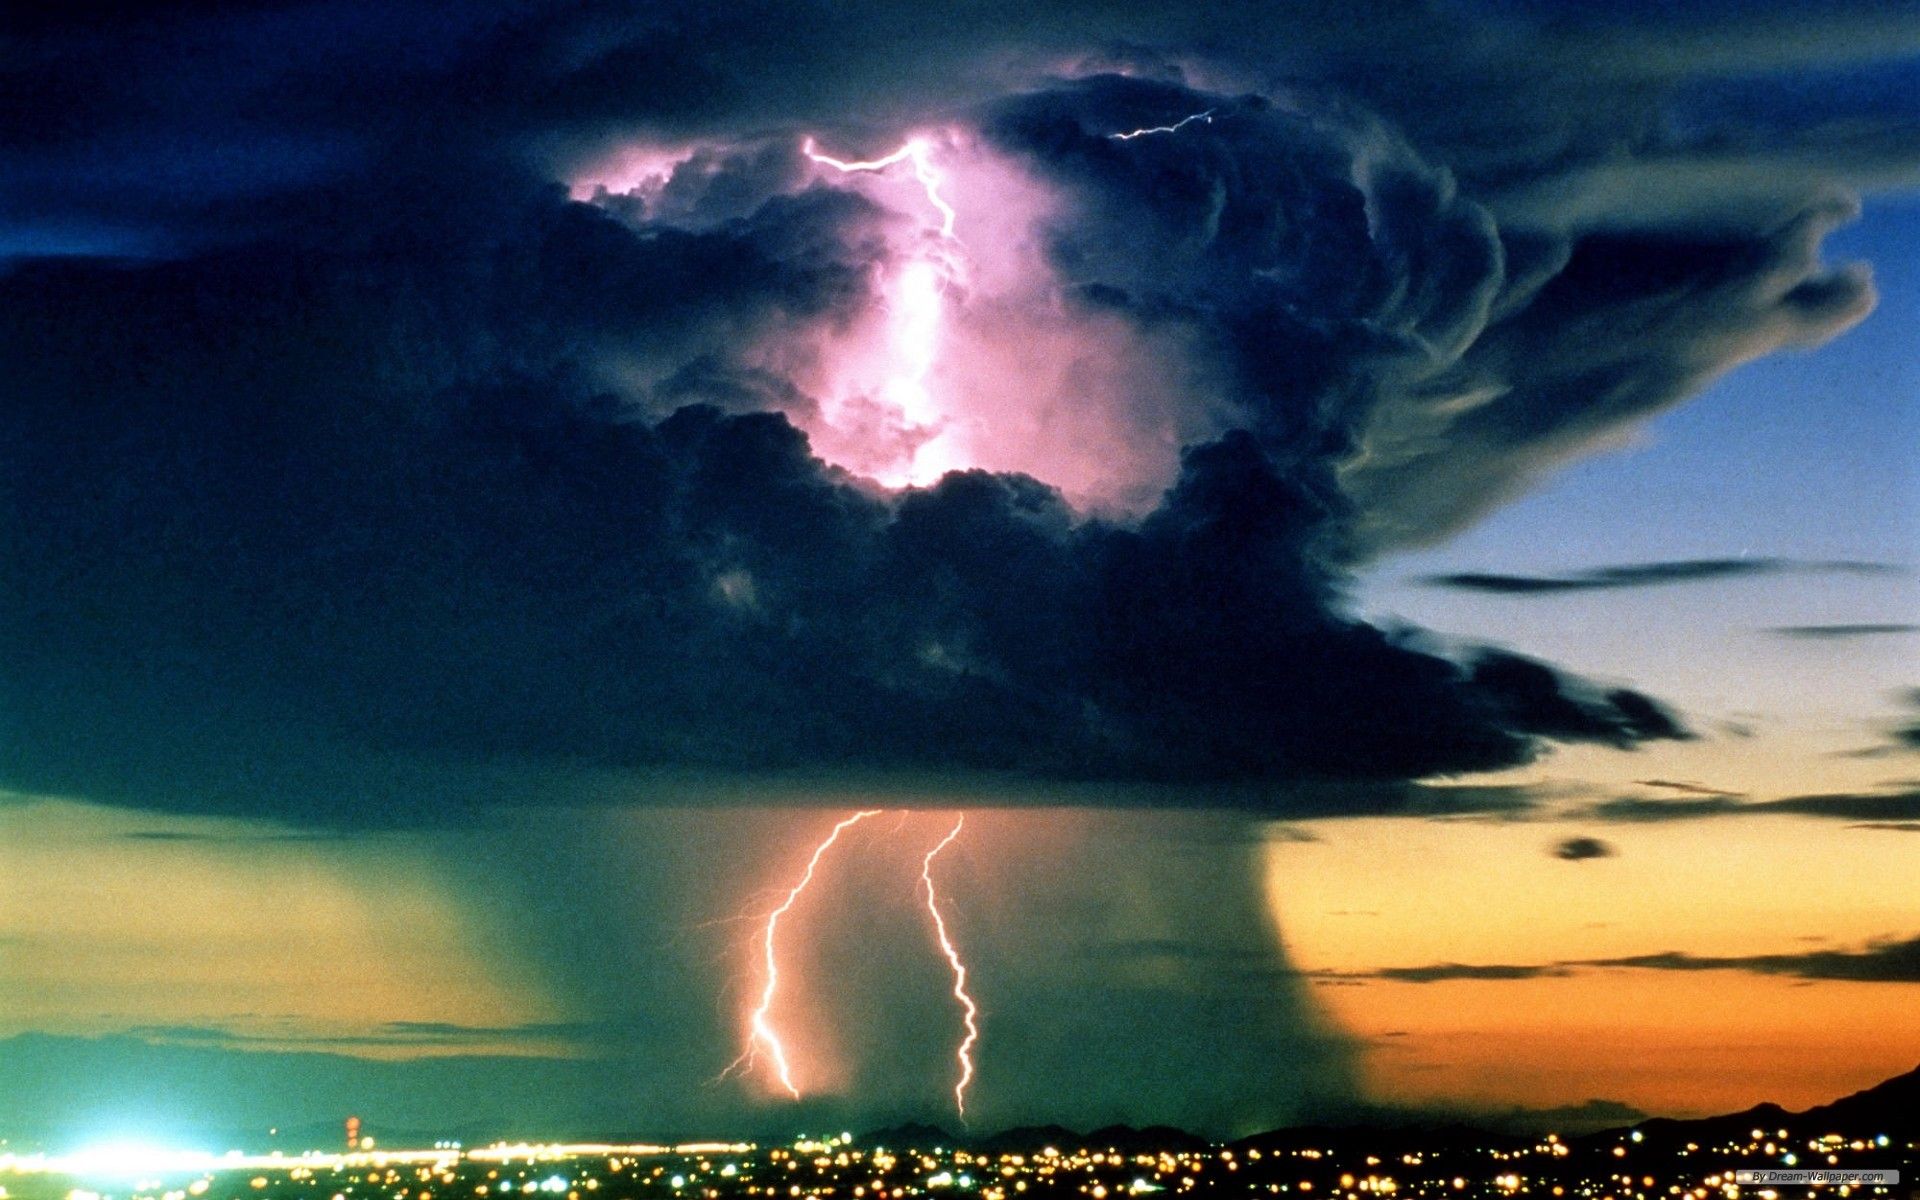 HD wallpaper, Storm, Pictures, Amazing